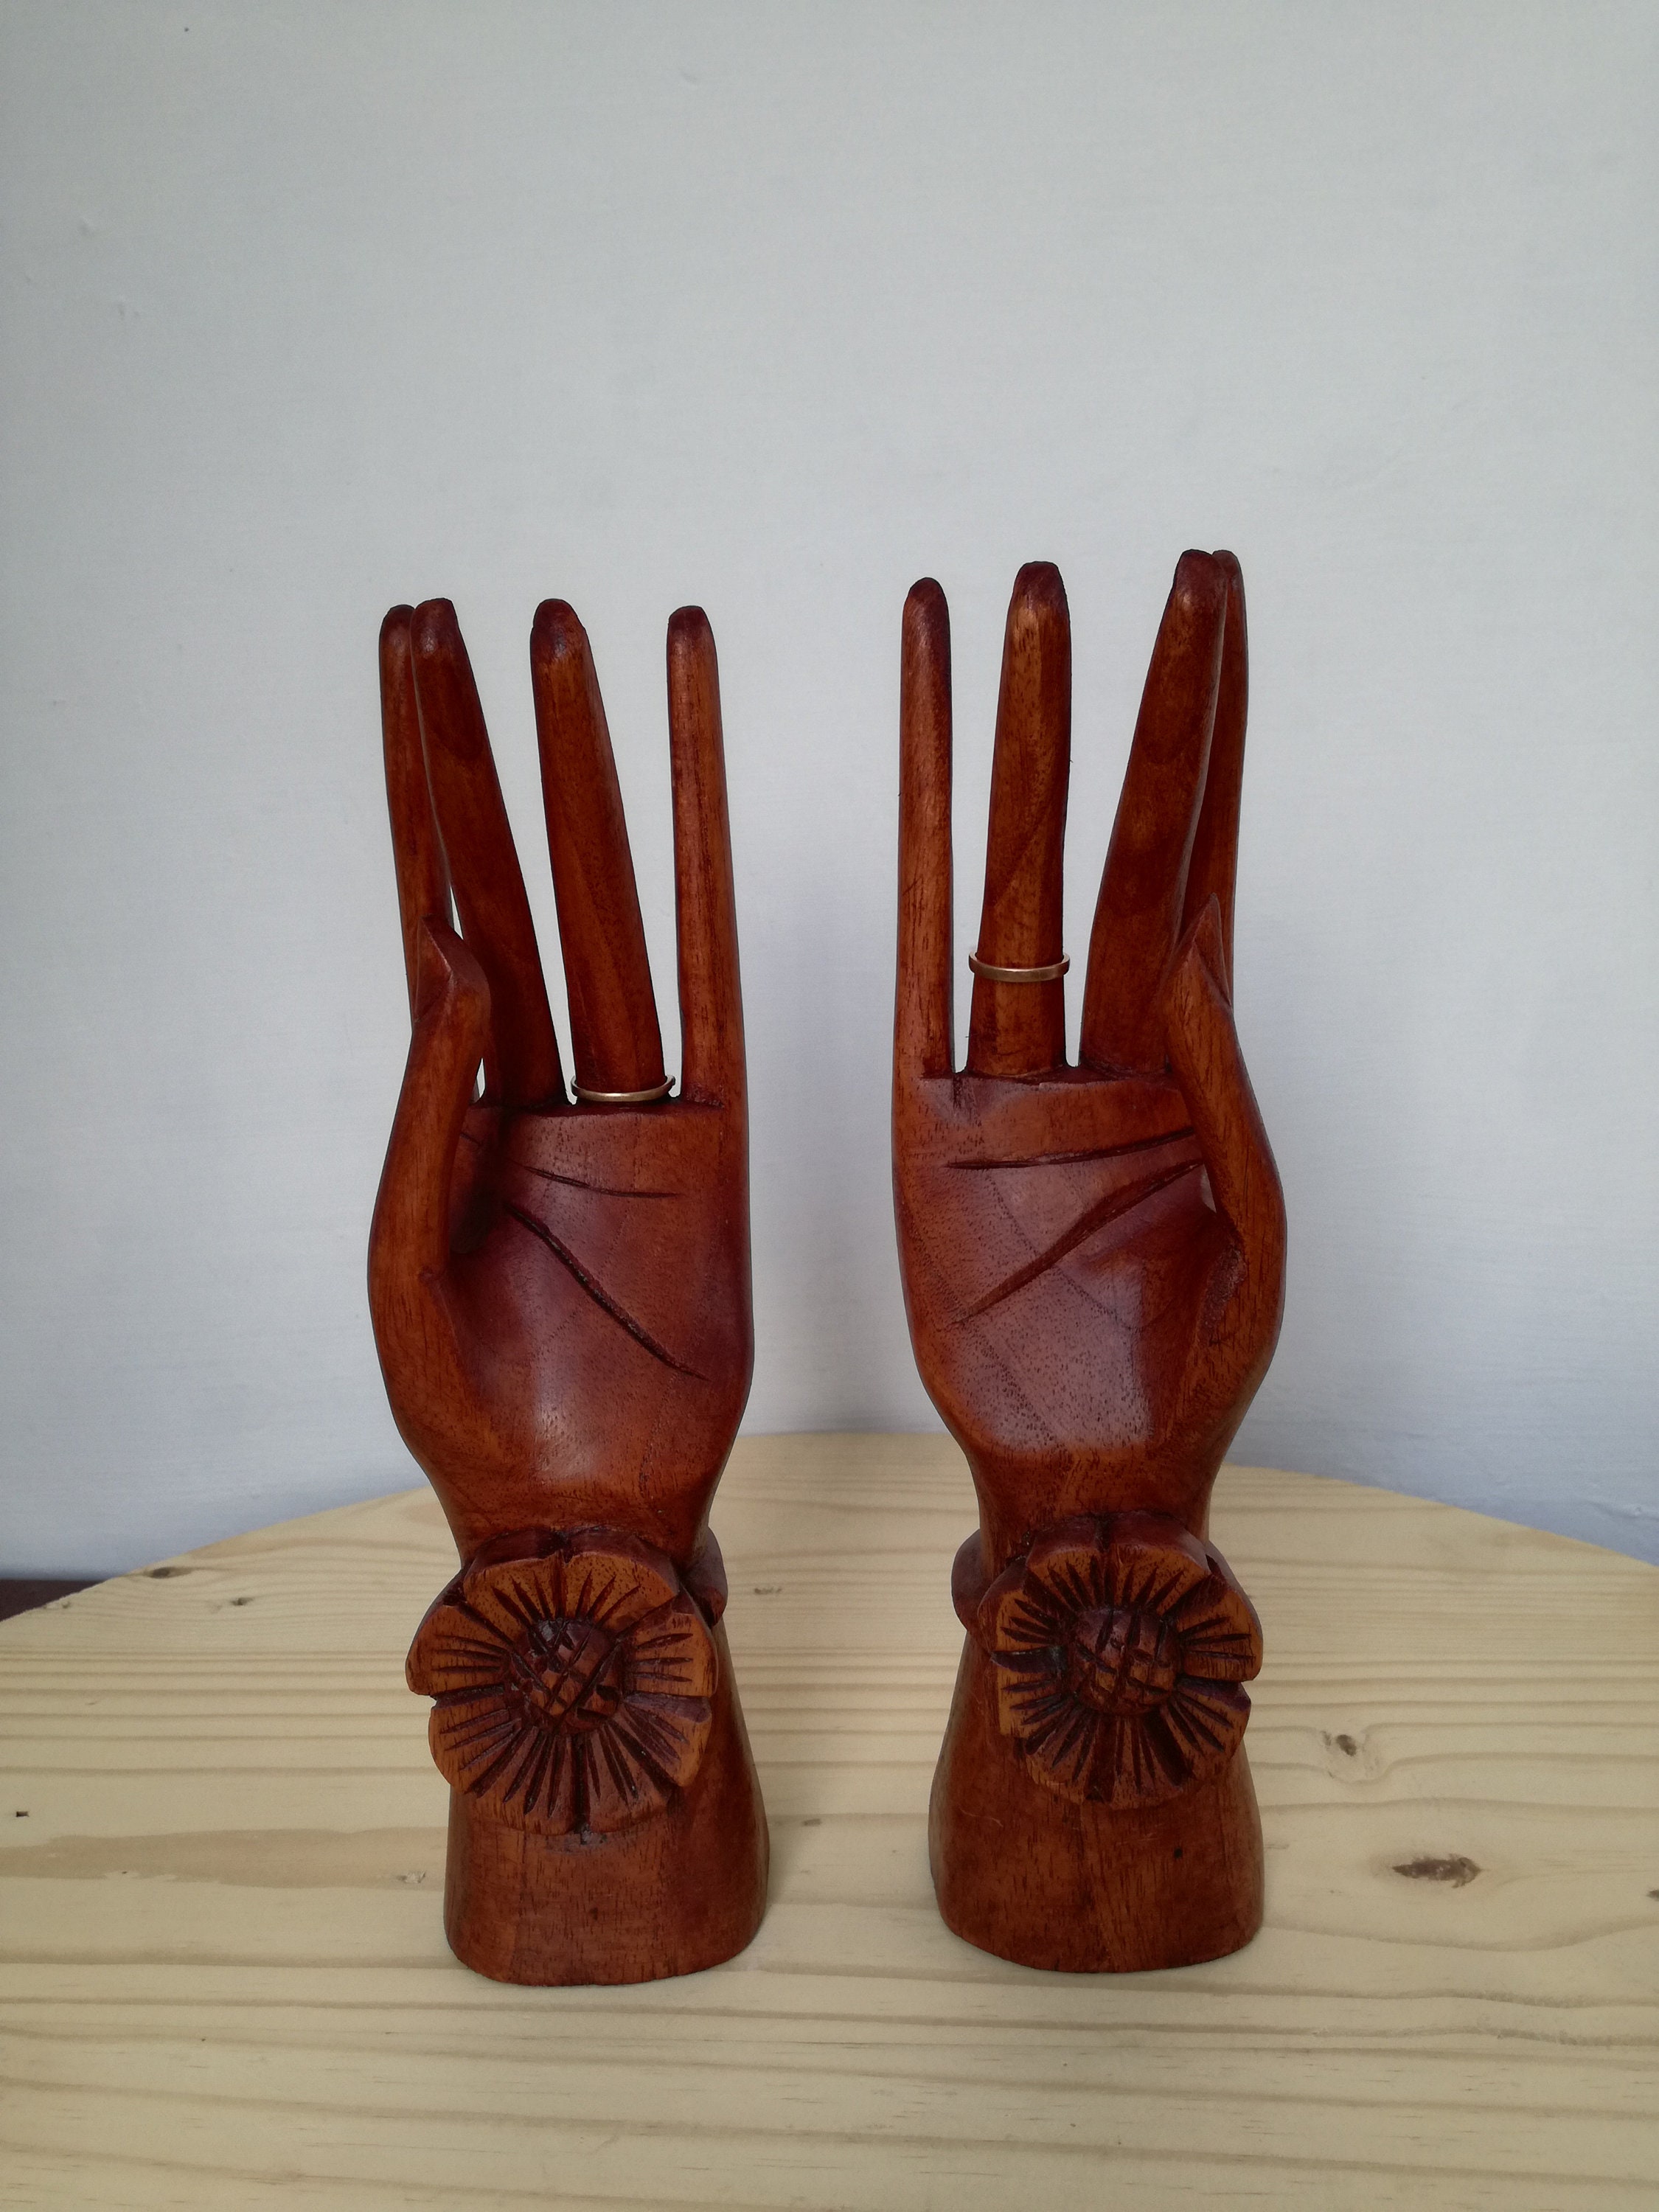 Hand Jewelry Display, Wood Display, Ring Stand Holder, Vintage Hand, Ring  Display 